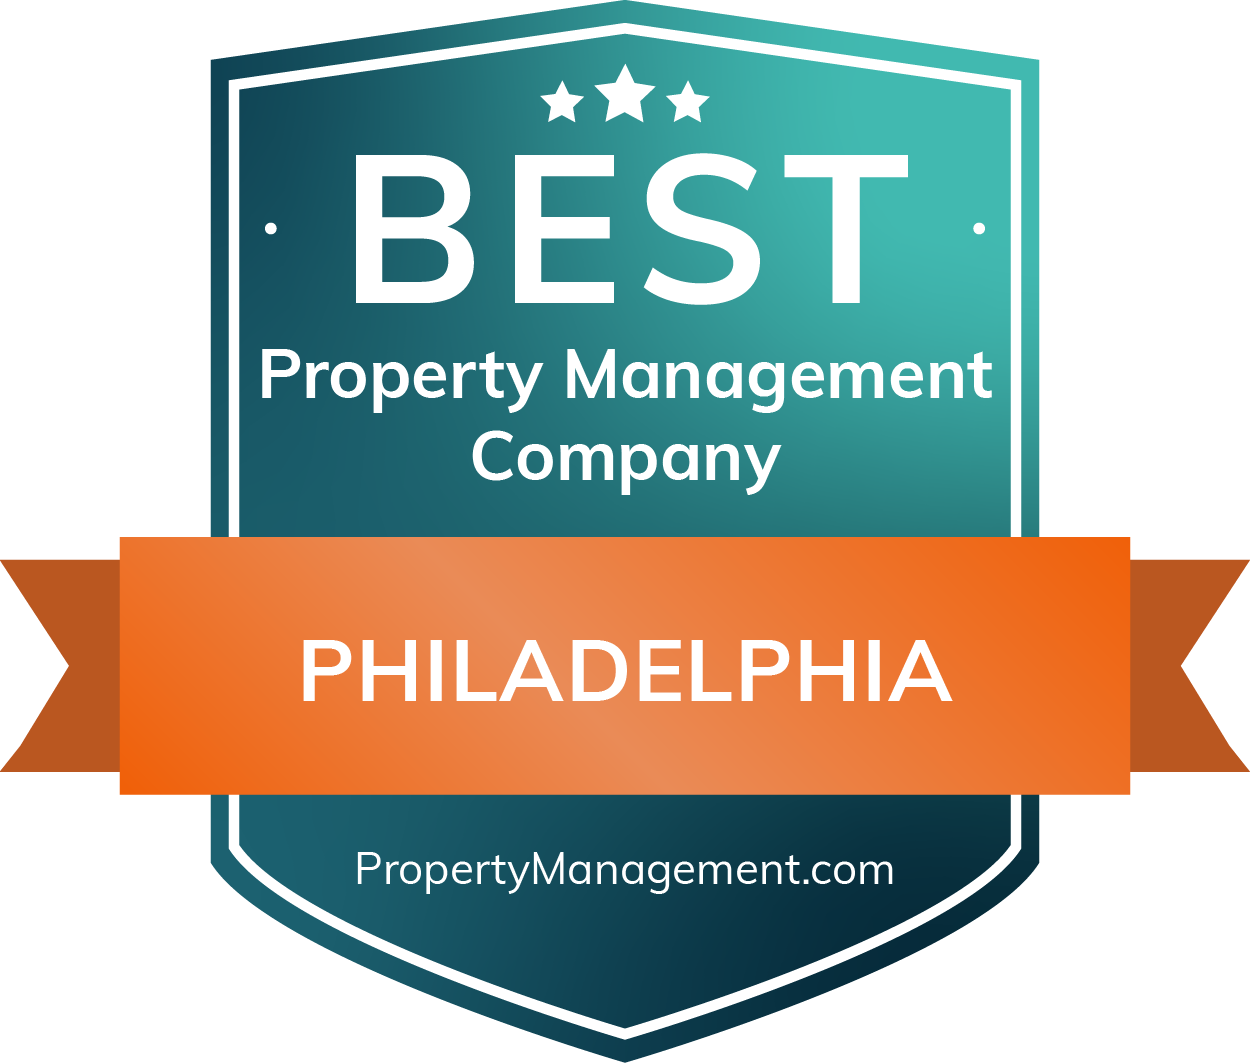 The-Best-Property-Management-in-philadelphia-pa-Badge